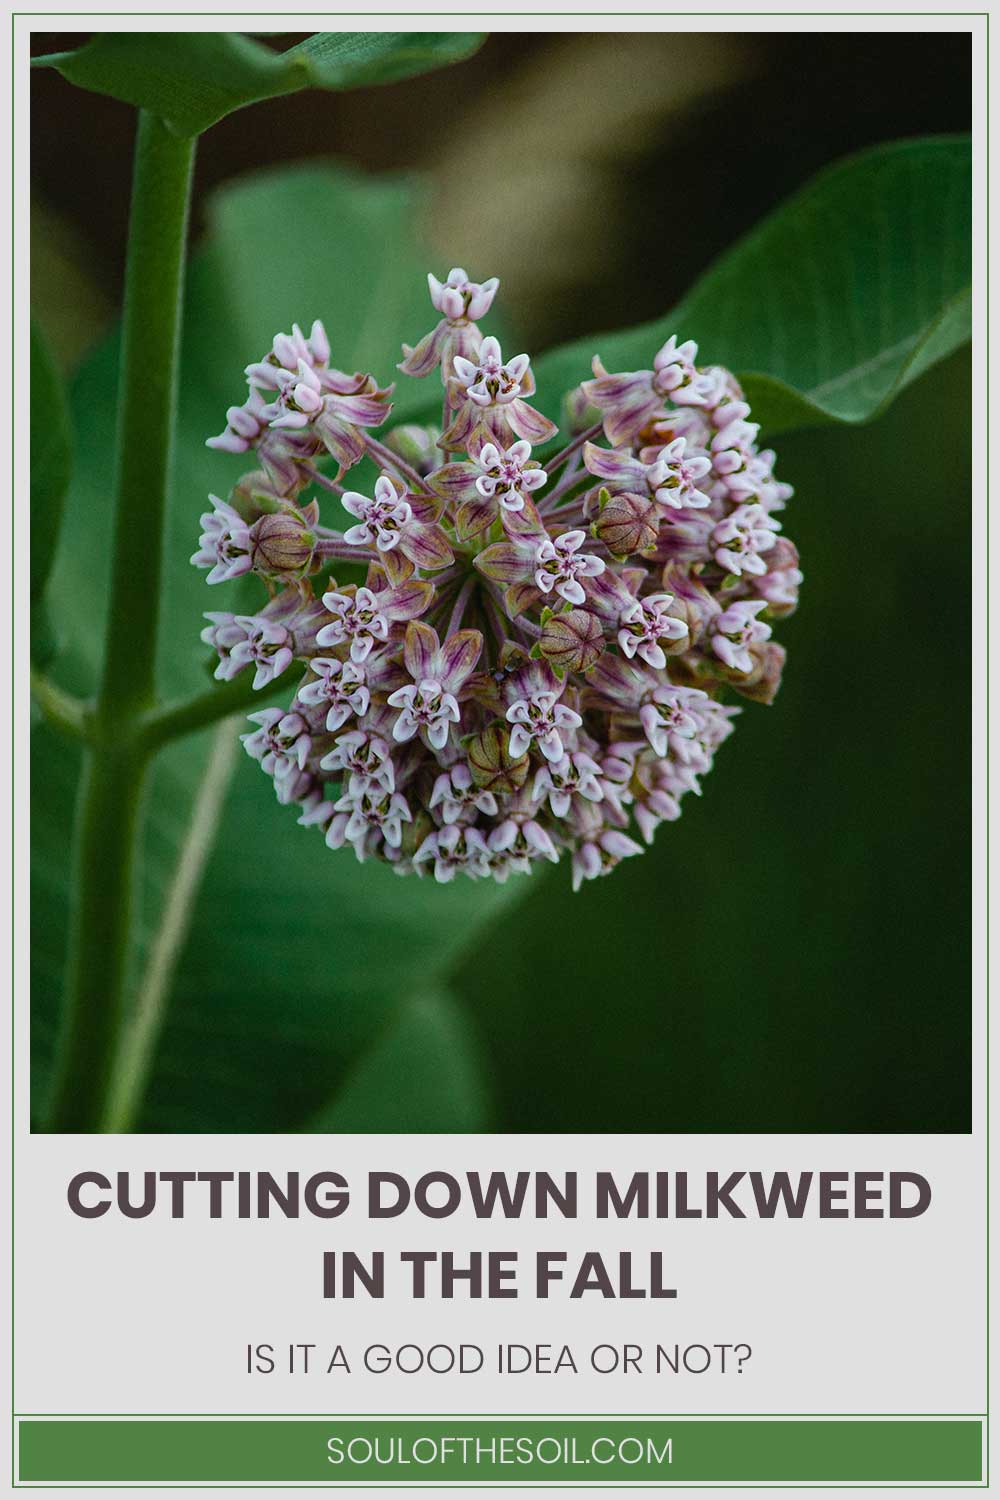 Milkweed flower and green leaves - is it a good idea to Cut Down Milkweed In The Fall